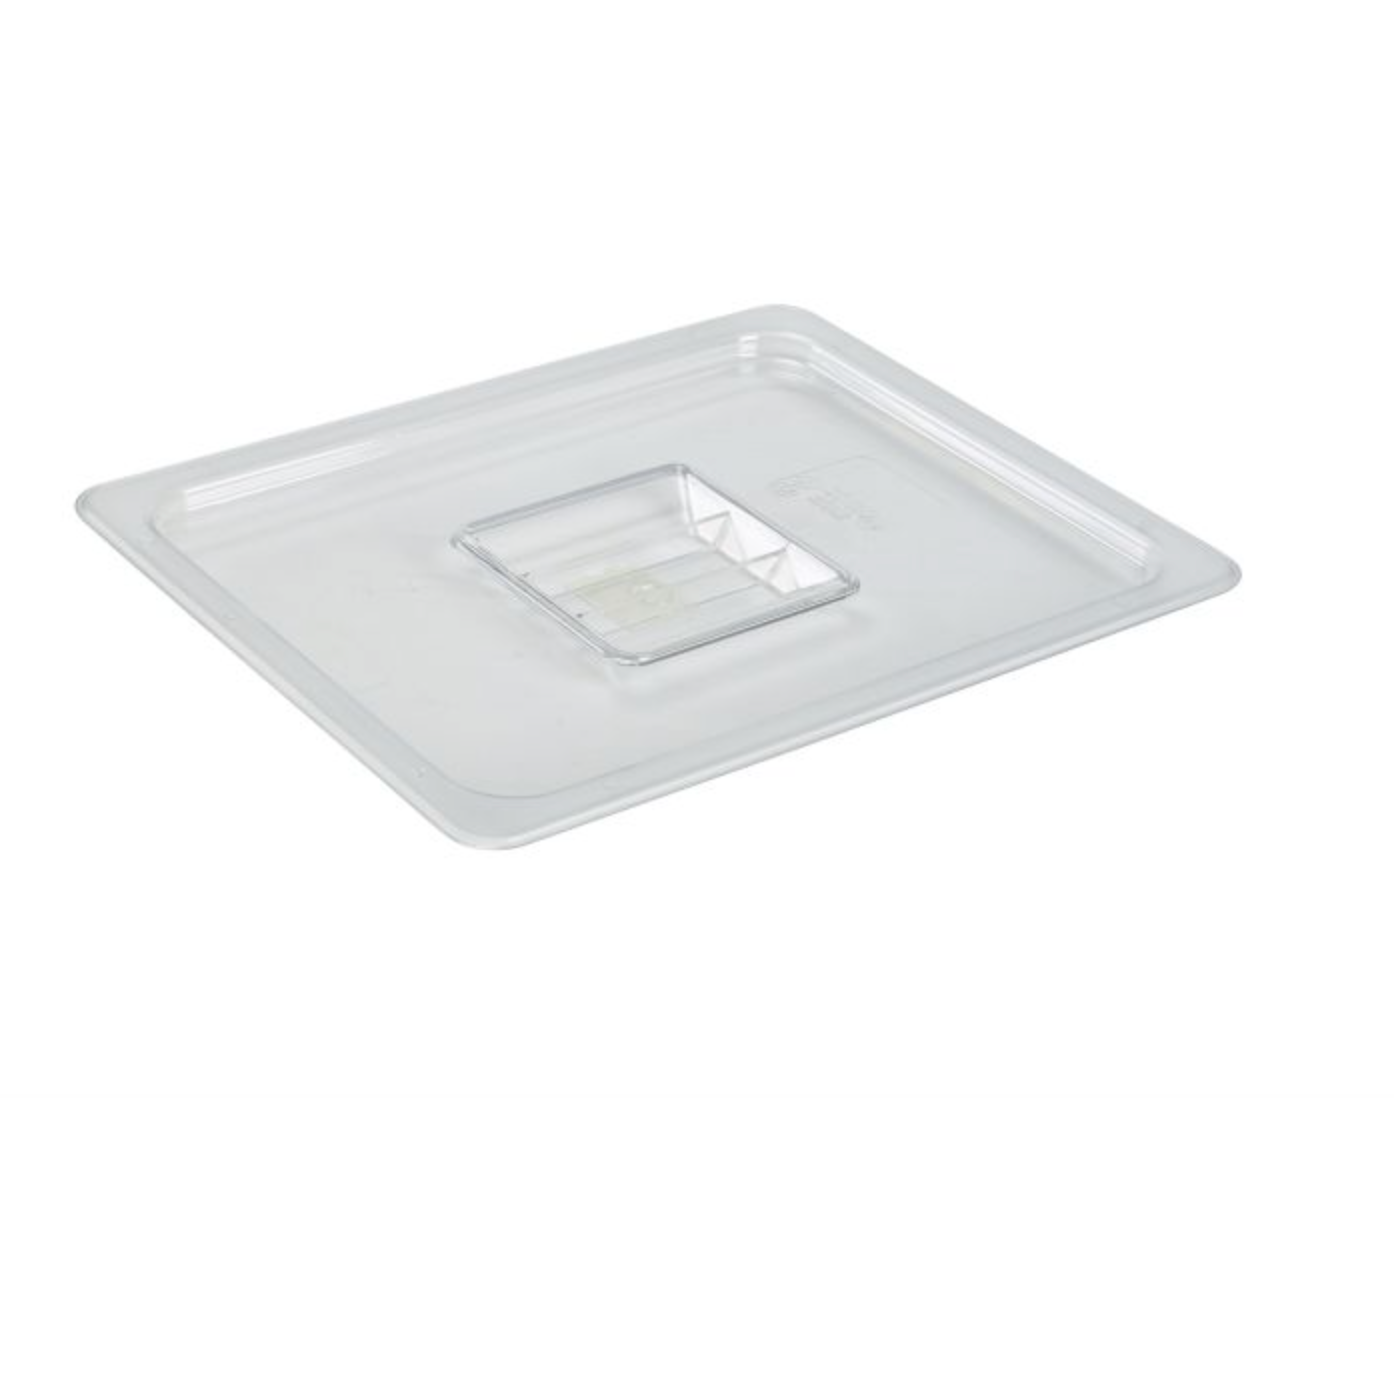 GenWare 1/2 Polycarbonate GN Lid Clear